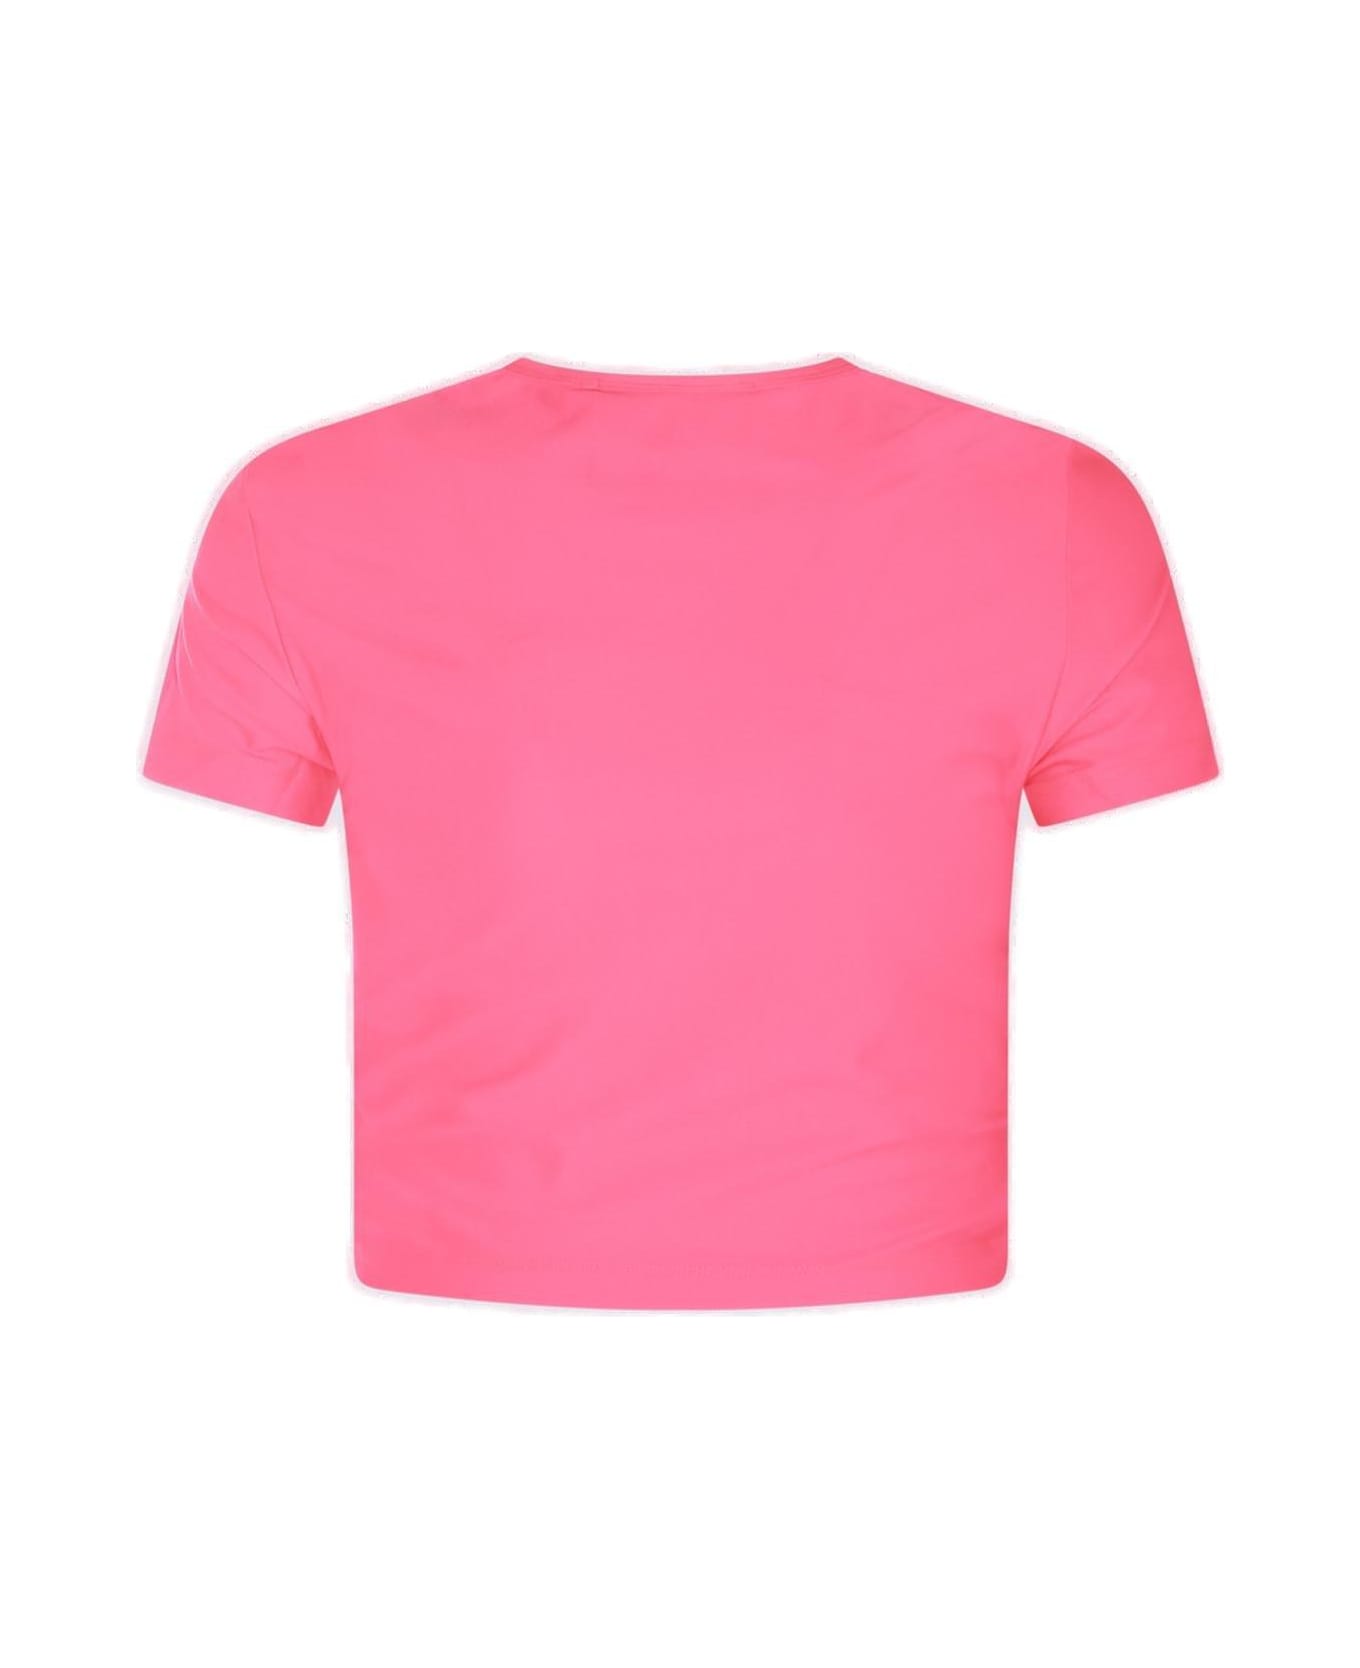 Versace Jeans Couture Logo-printed Crewneck Cropped T-shirt - Fuchsia